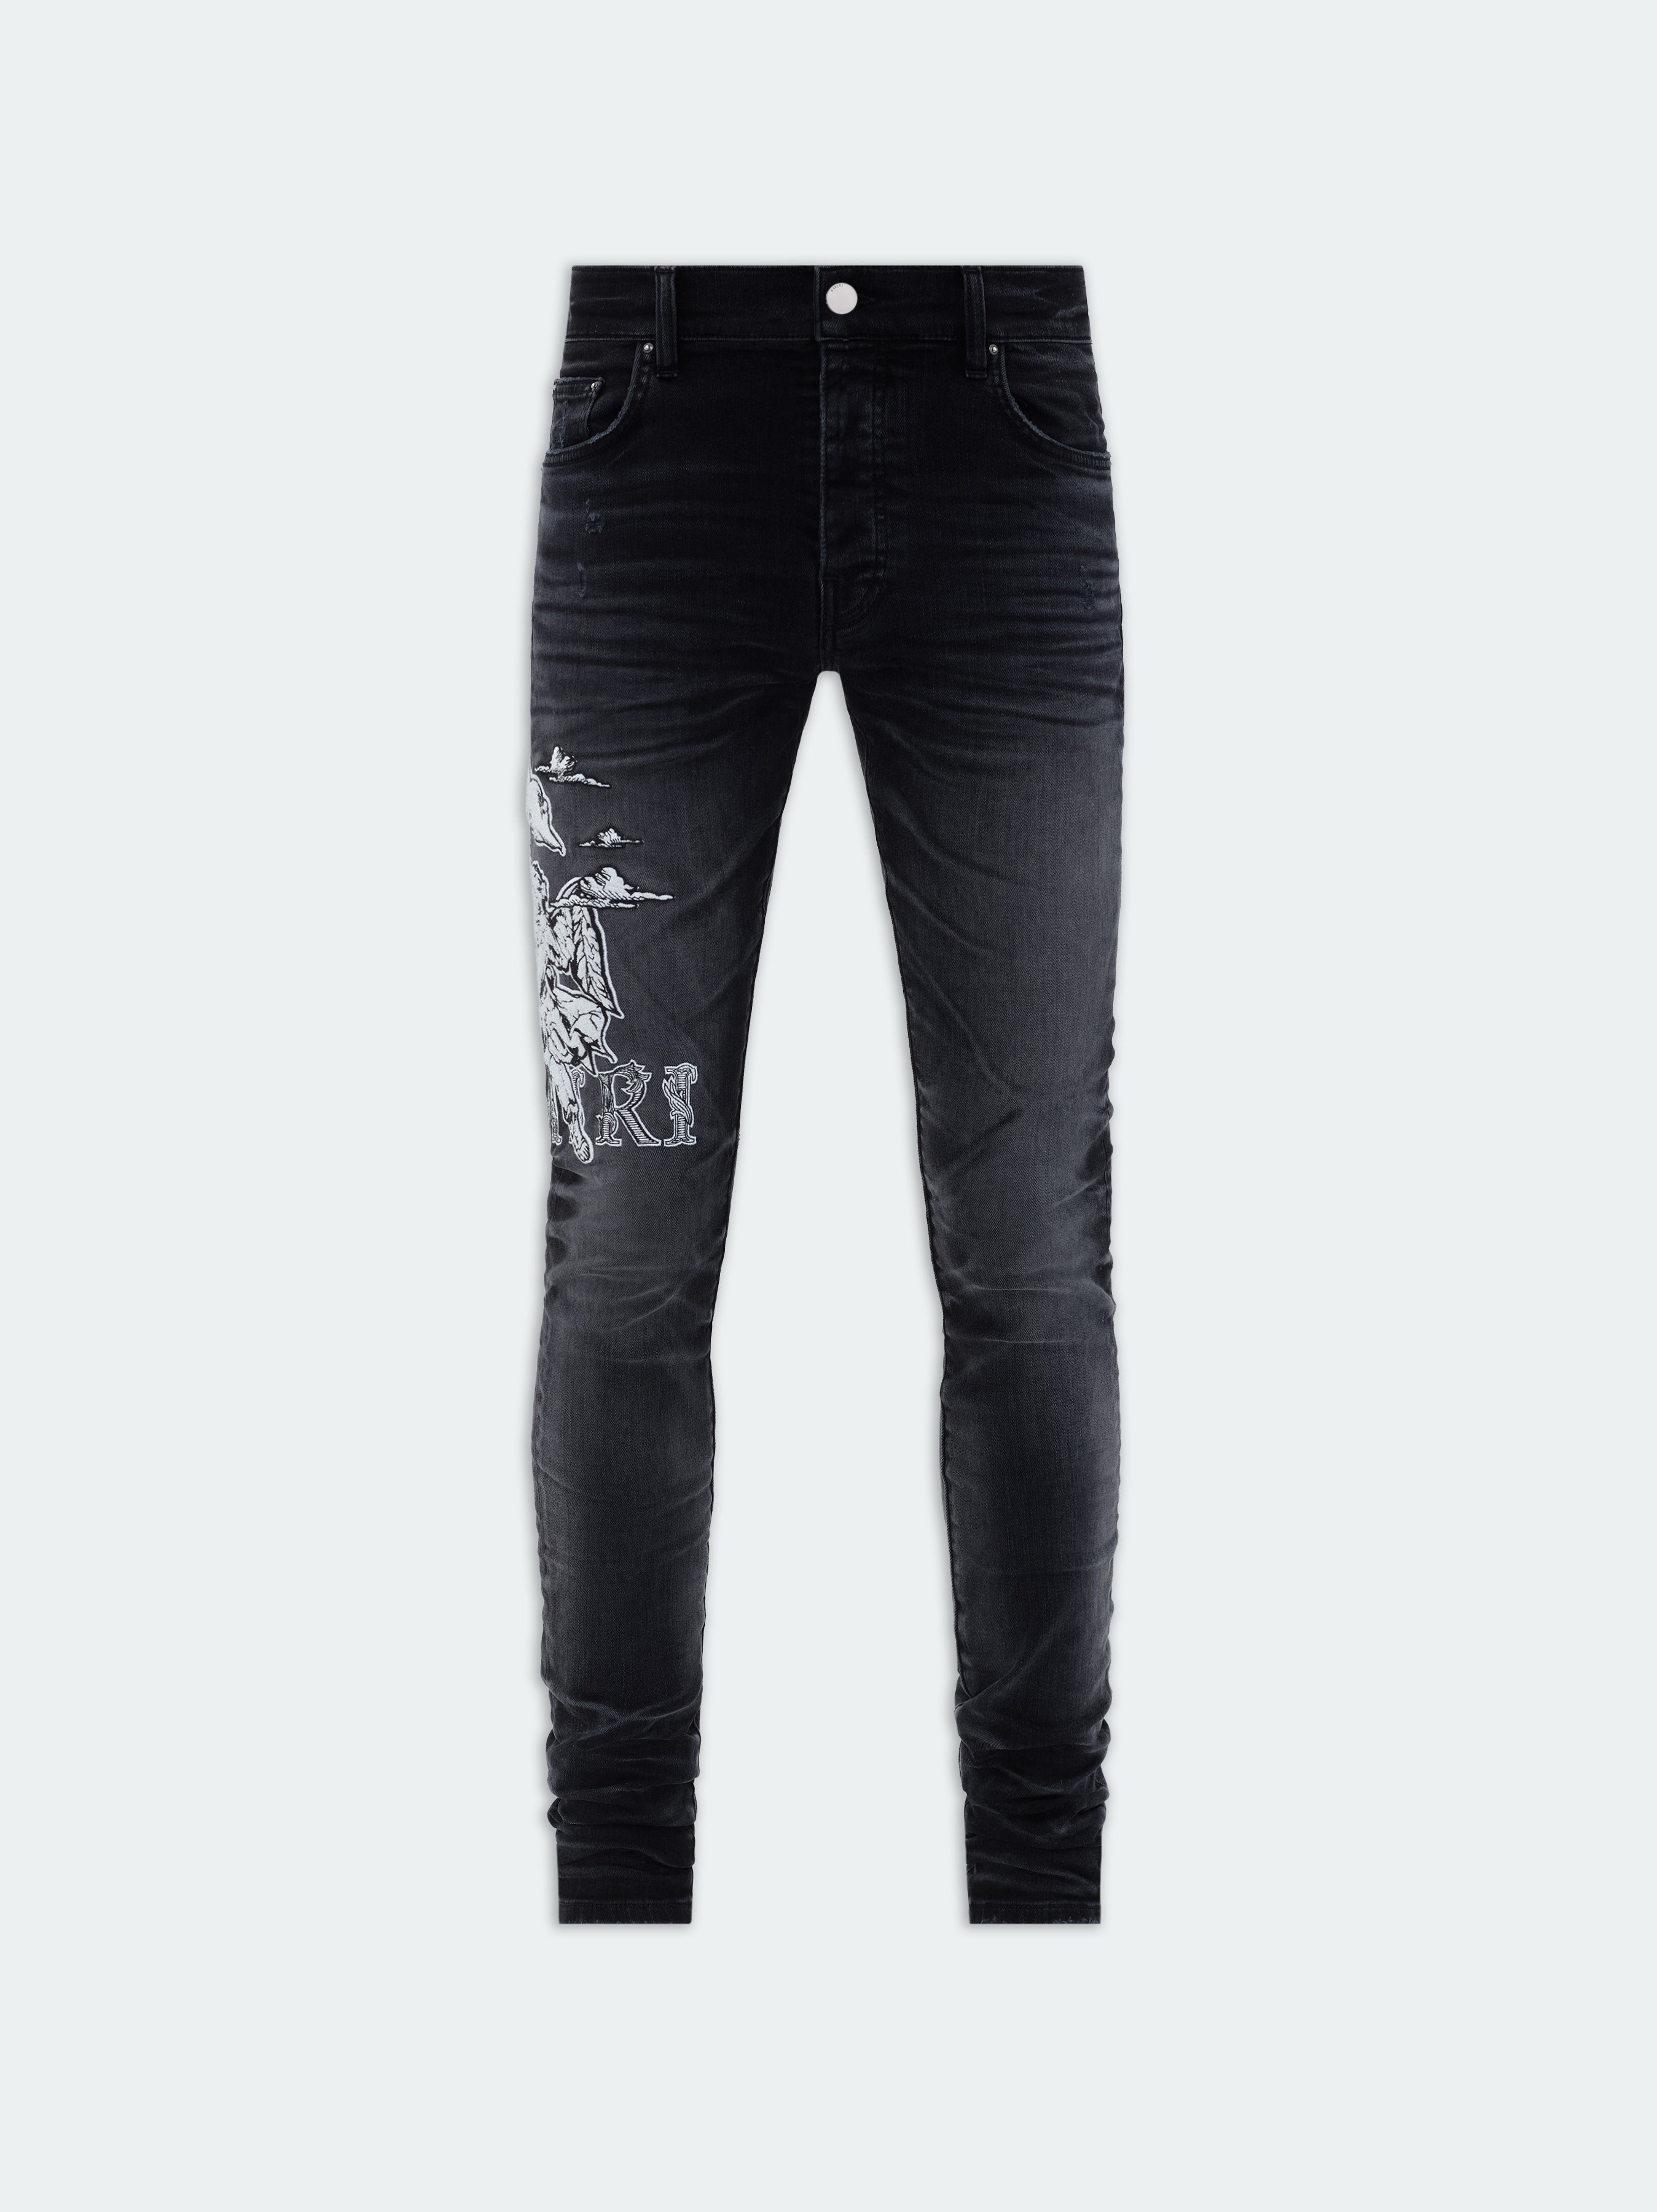 Product AMIRI ANGEL JEAN - Faded Black featured image